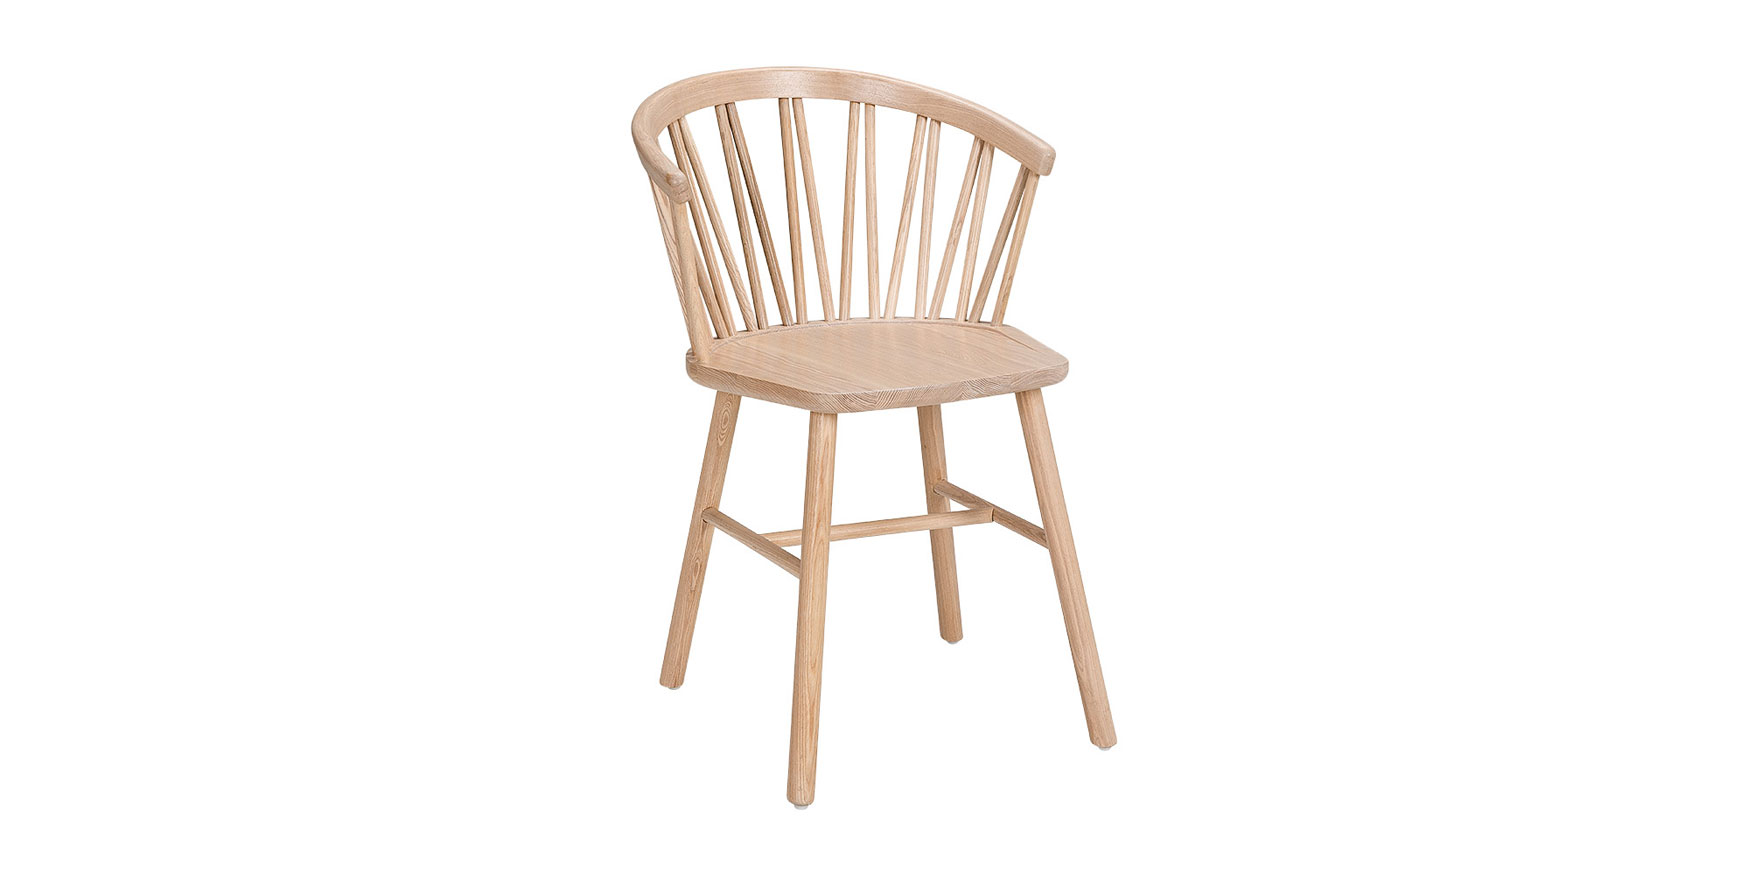 dining chair cost
